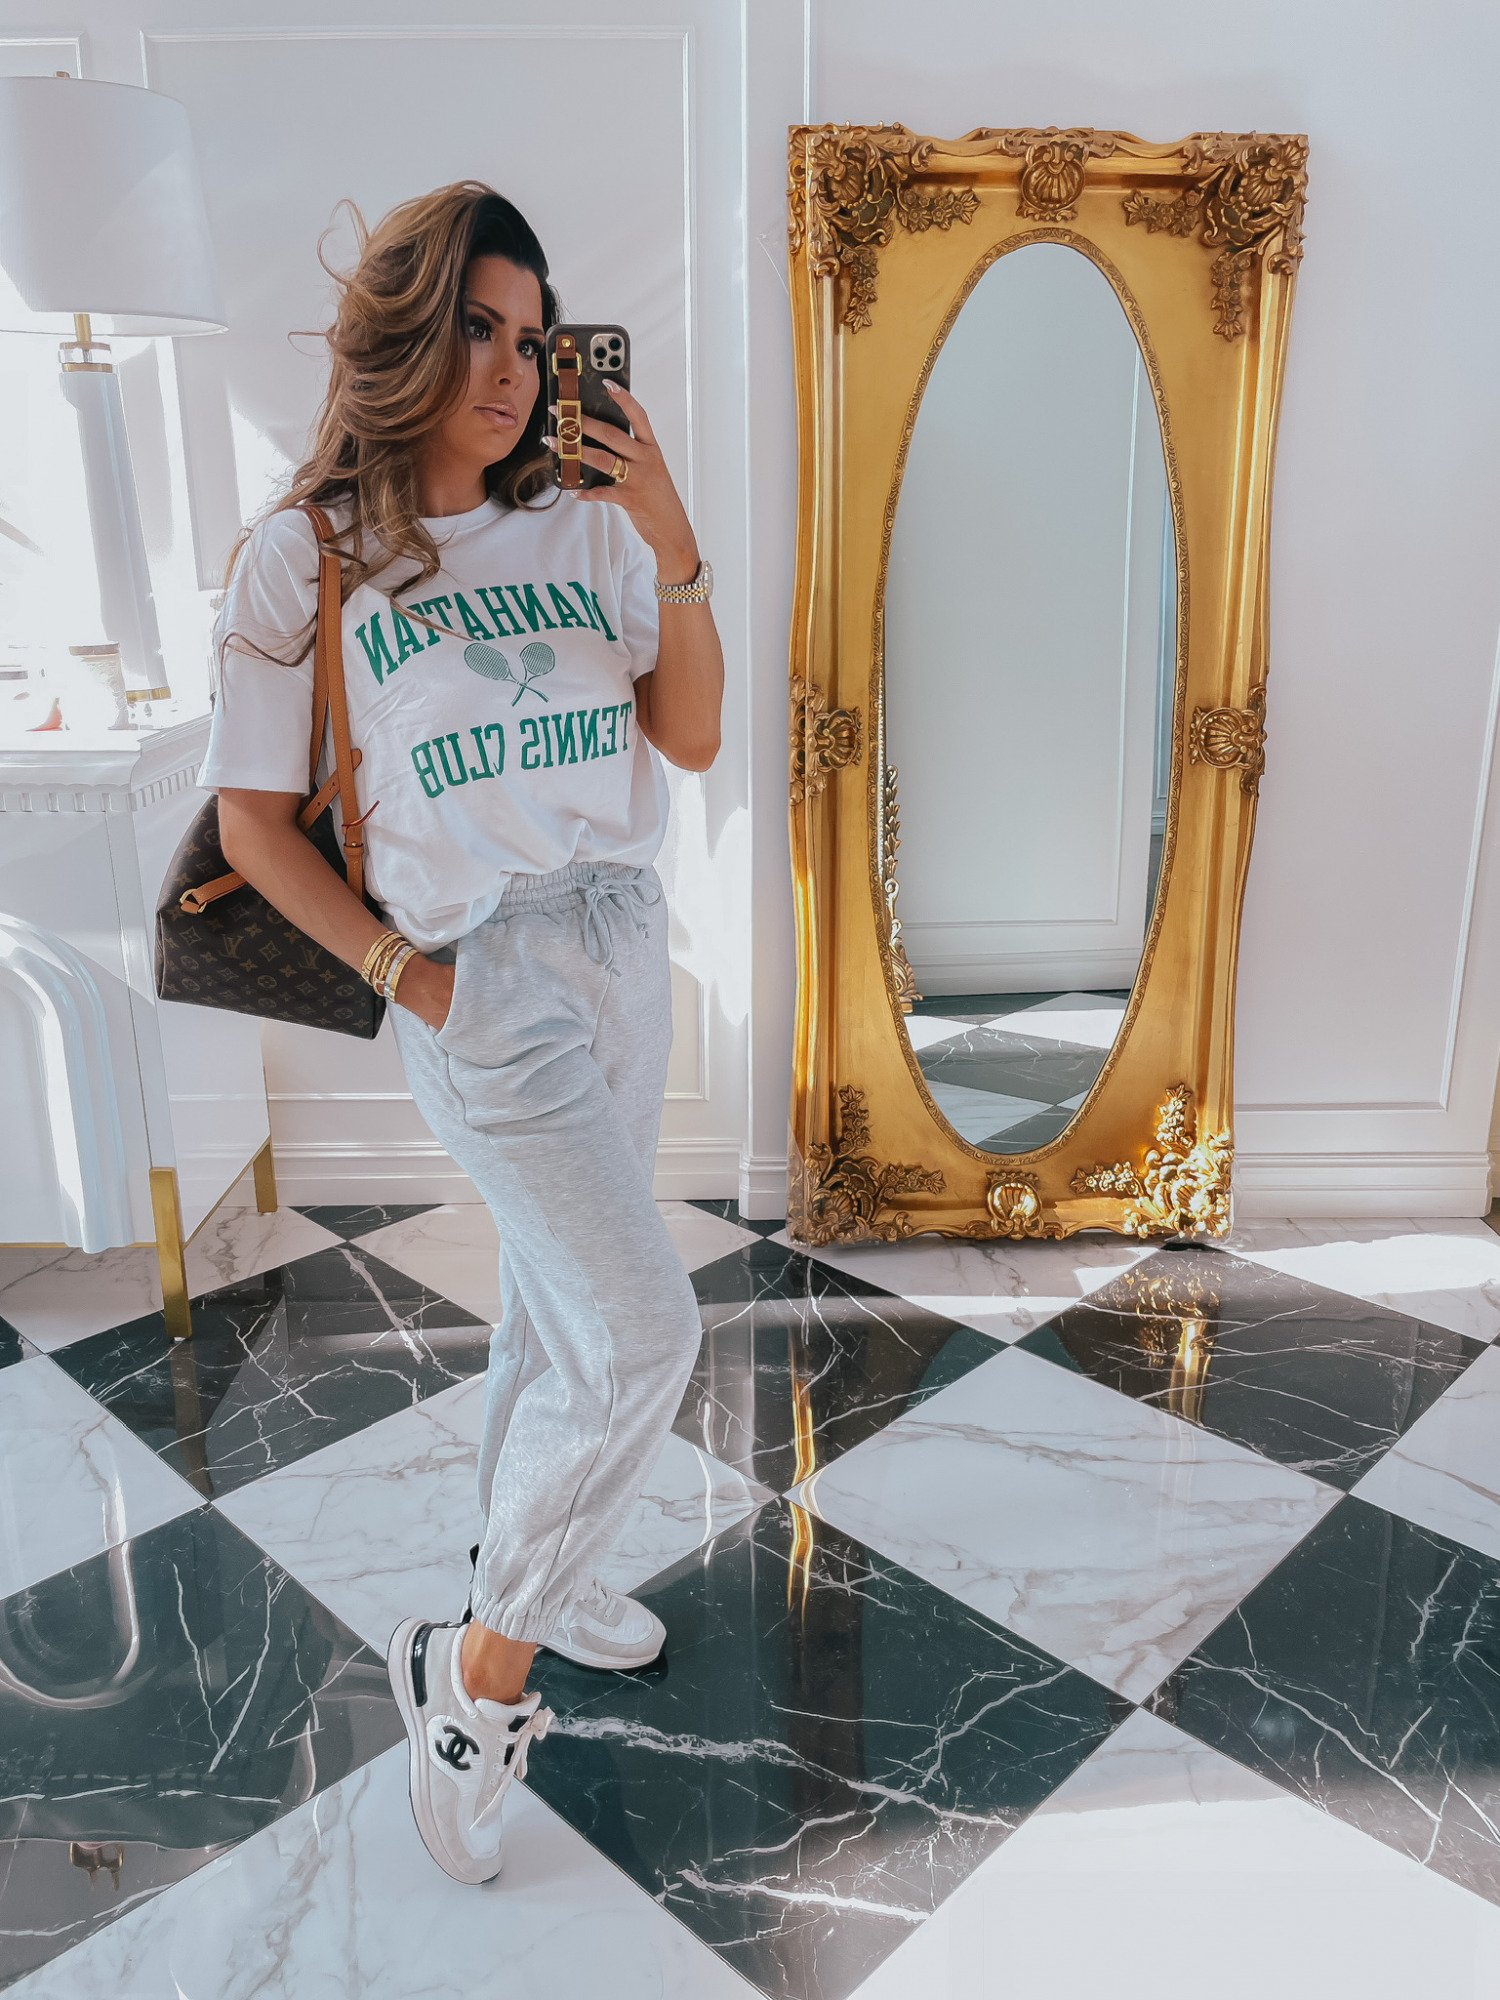 Emily-ann-gemma-abercrombie-tee-shirt-sweatpants-outfit-ltk-day-sale | LTK Sales by popular US fashion blog, The Sweetest Thing: image of Emily Gemma wearing a Manhattan Tennis Club shirt, grey sweatpants and sneakers. 